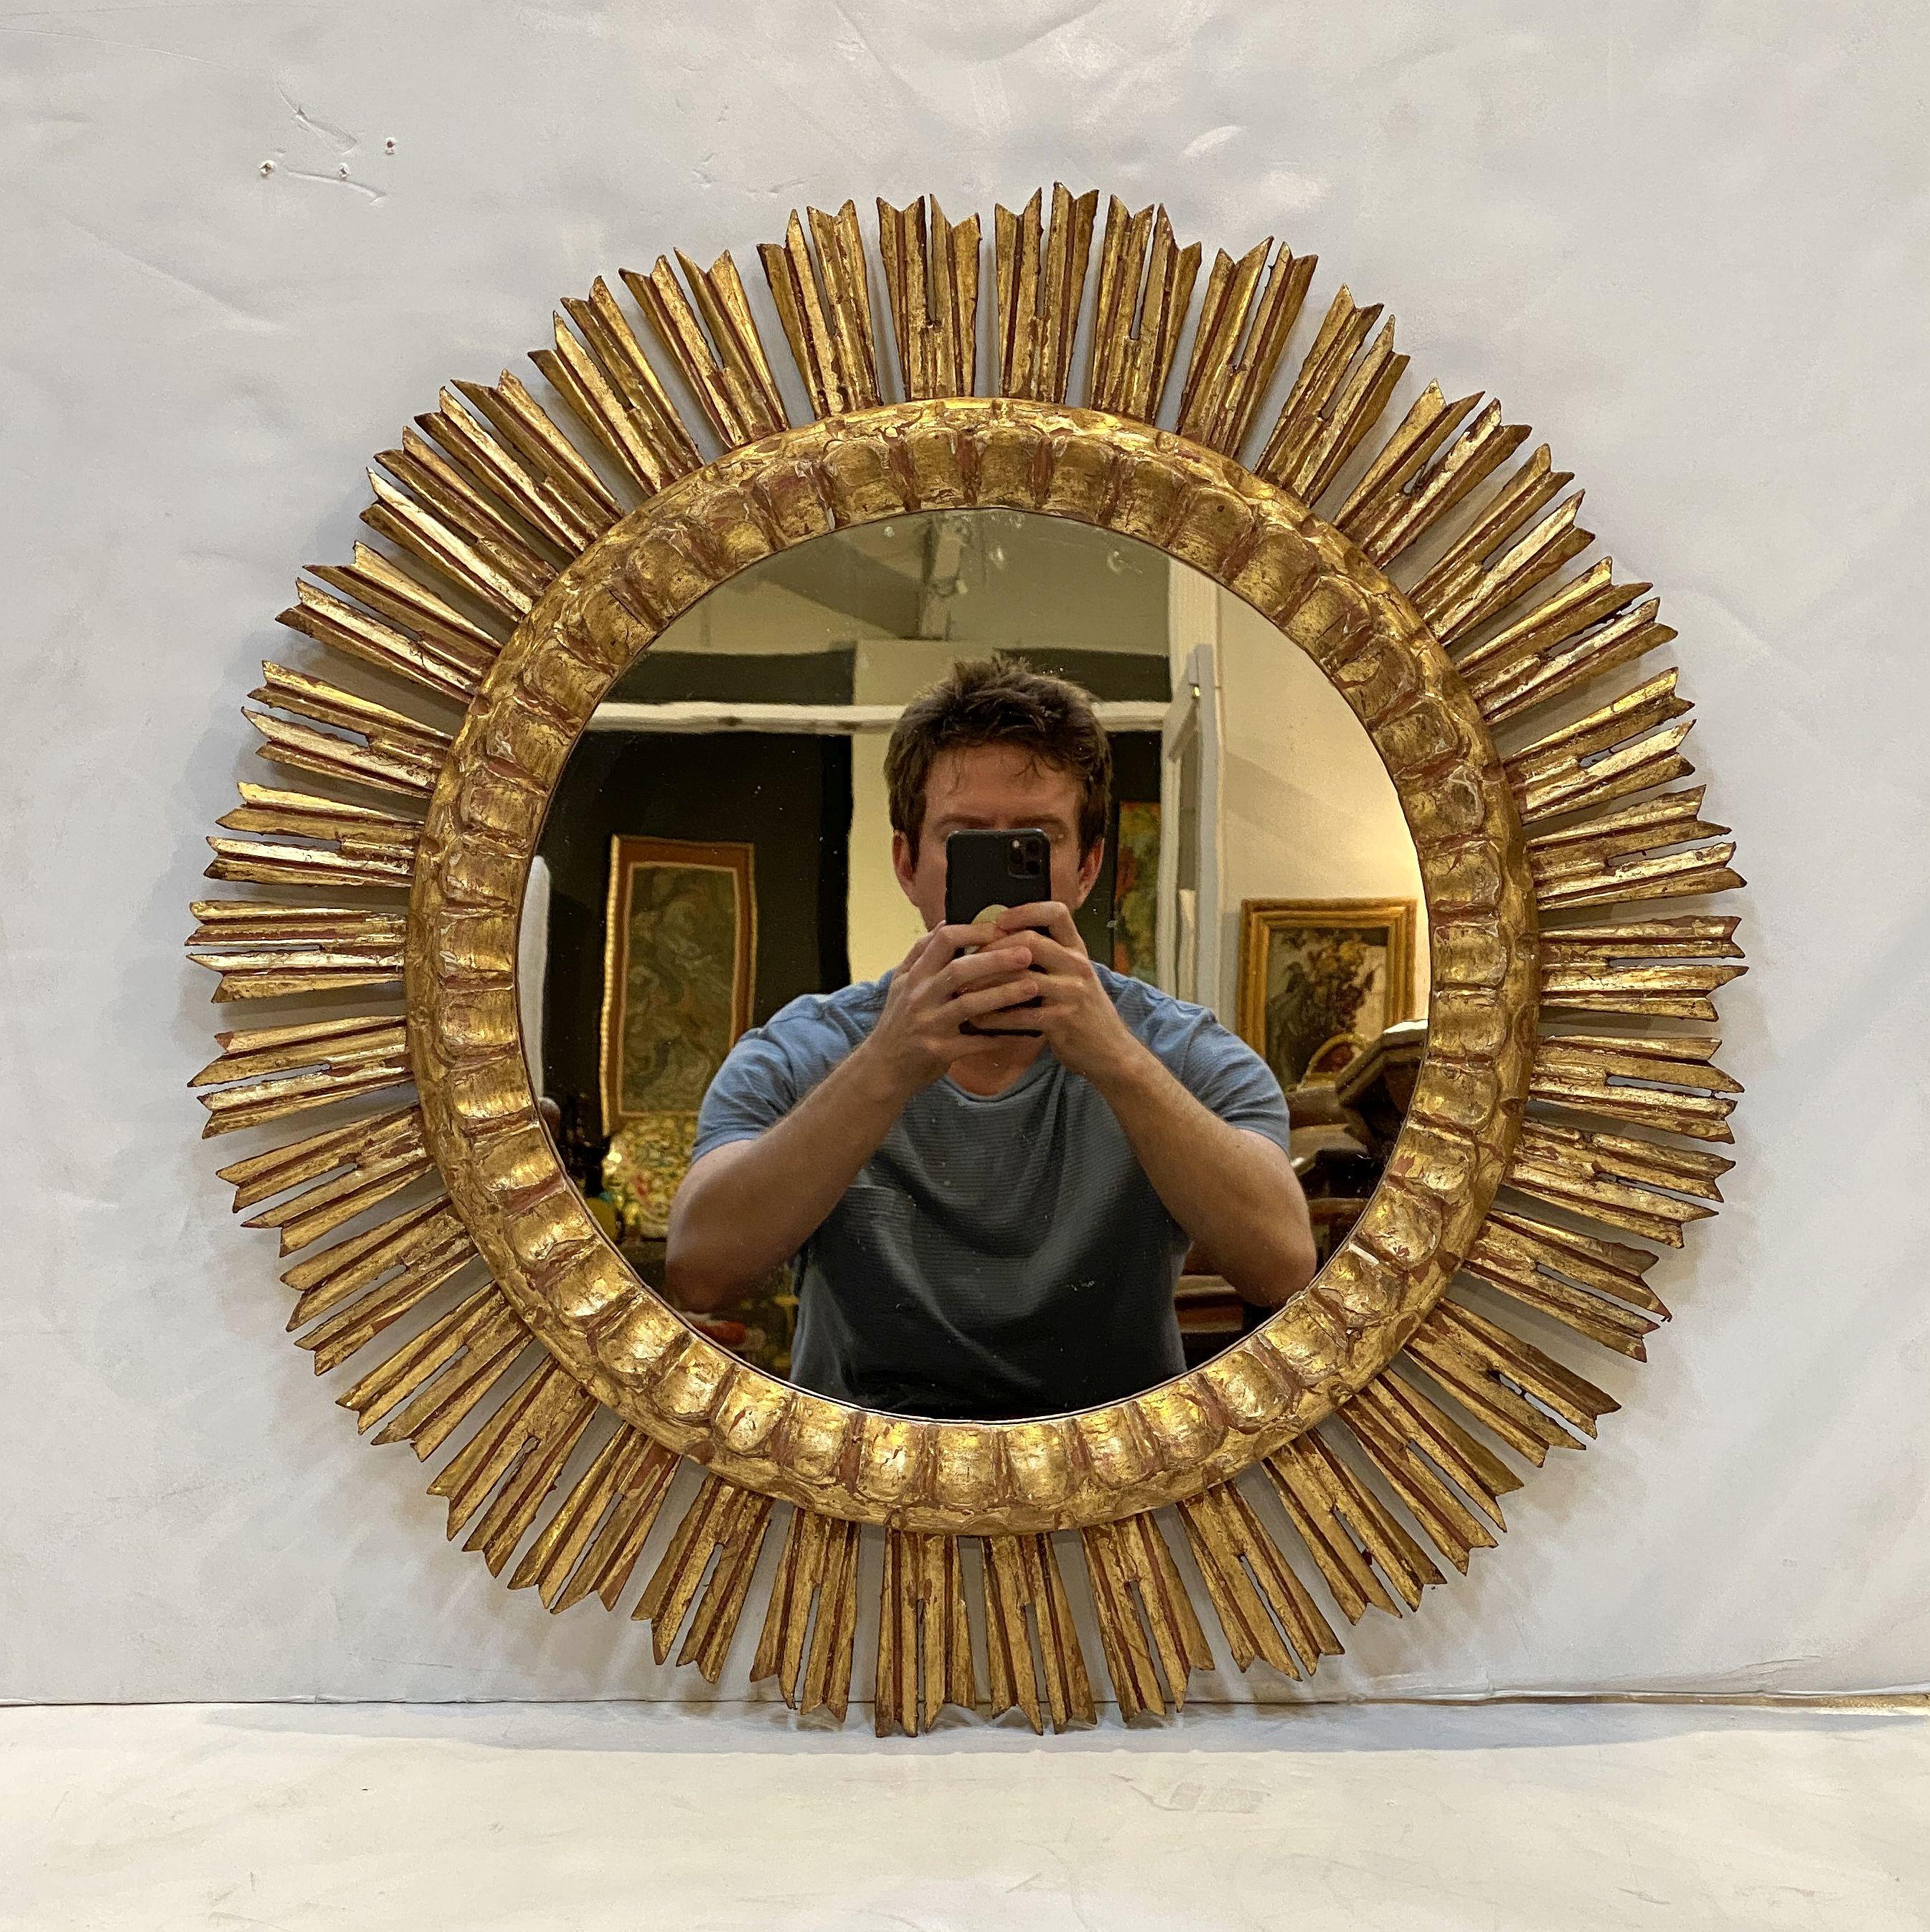 A lovely large French gilt sunburst (or starburst) mirror, 24 1/4 inches diameter with round mirrored glass center in a moulded frame.